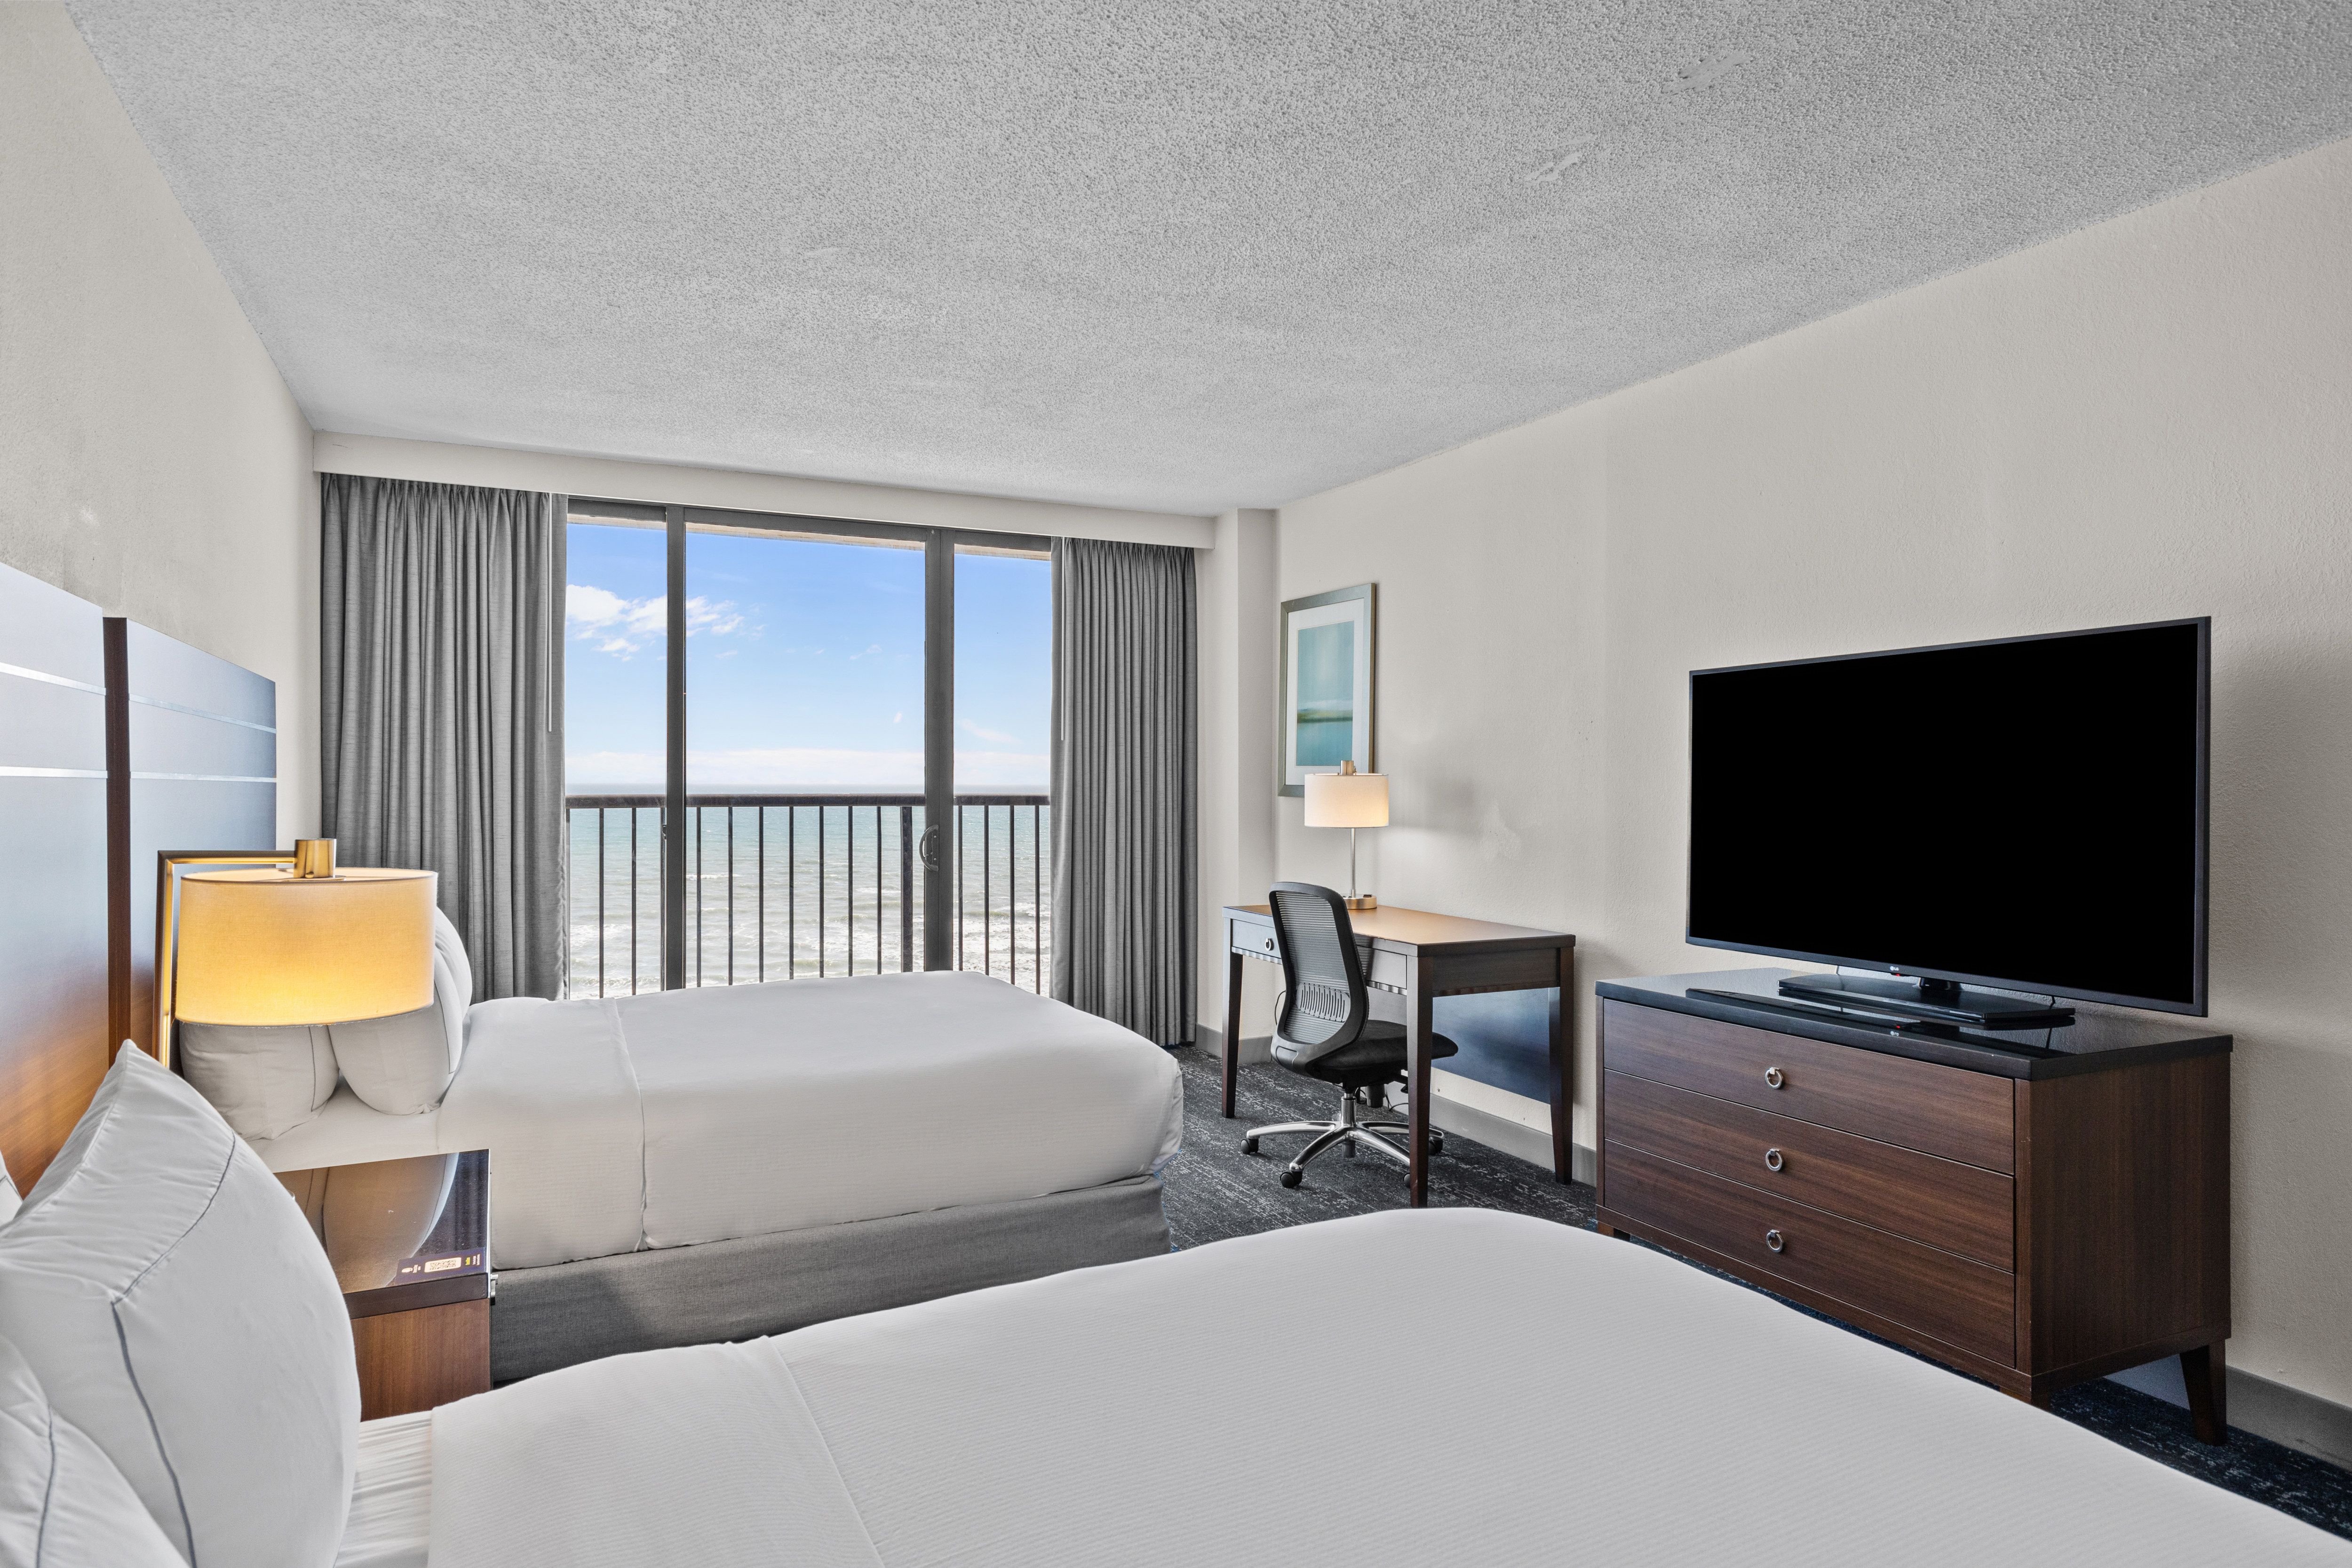 Two Beds Desk and HDTV in a Guest Room with Ocean View